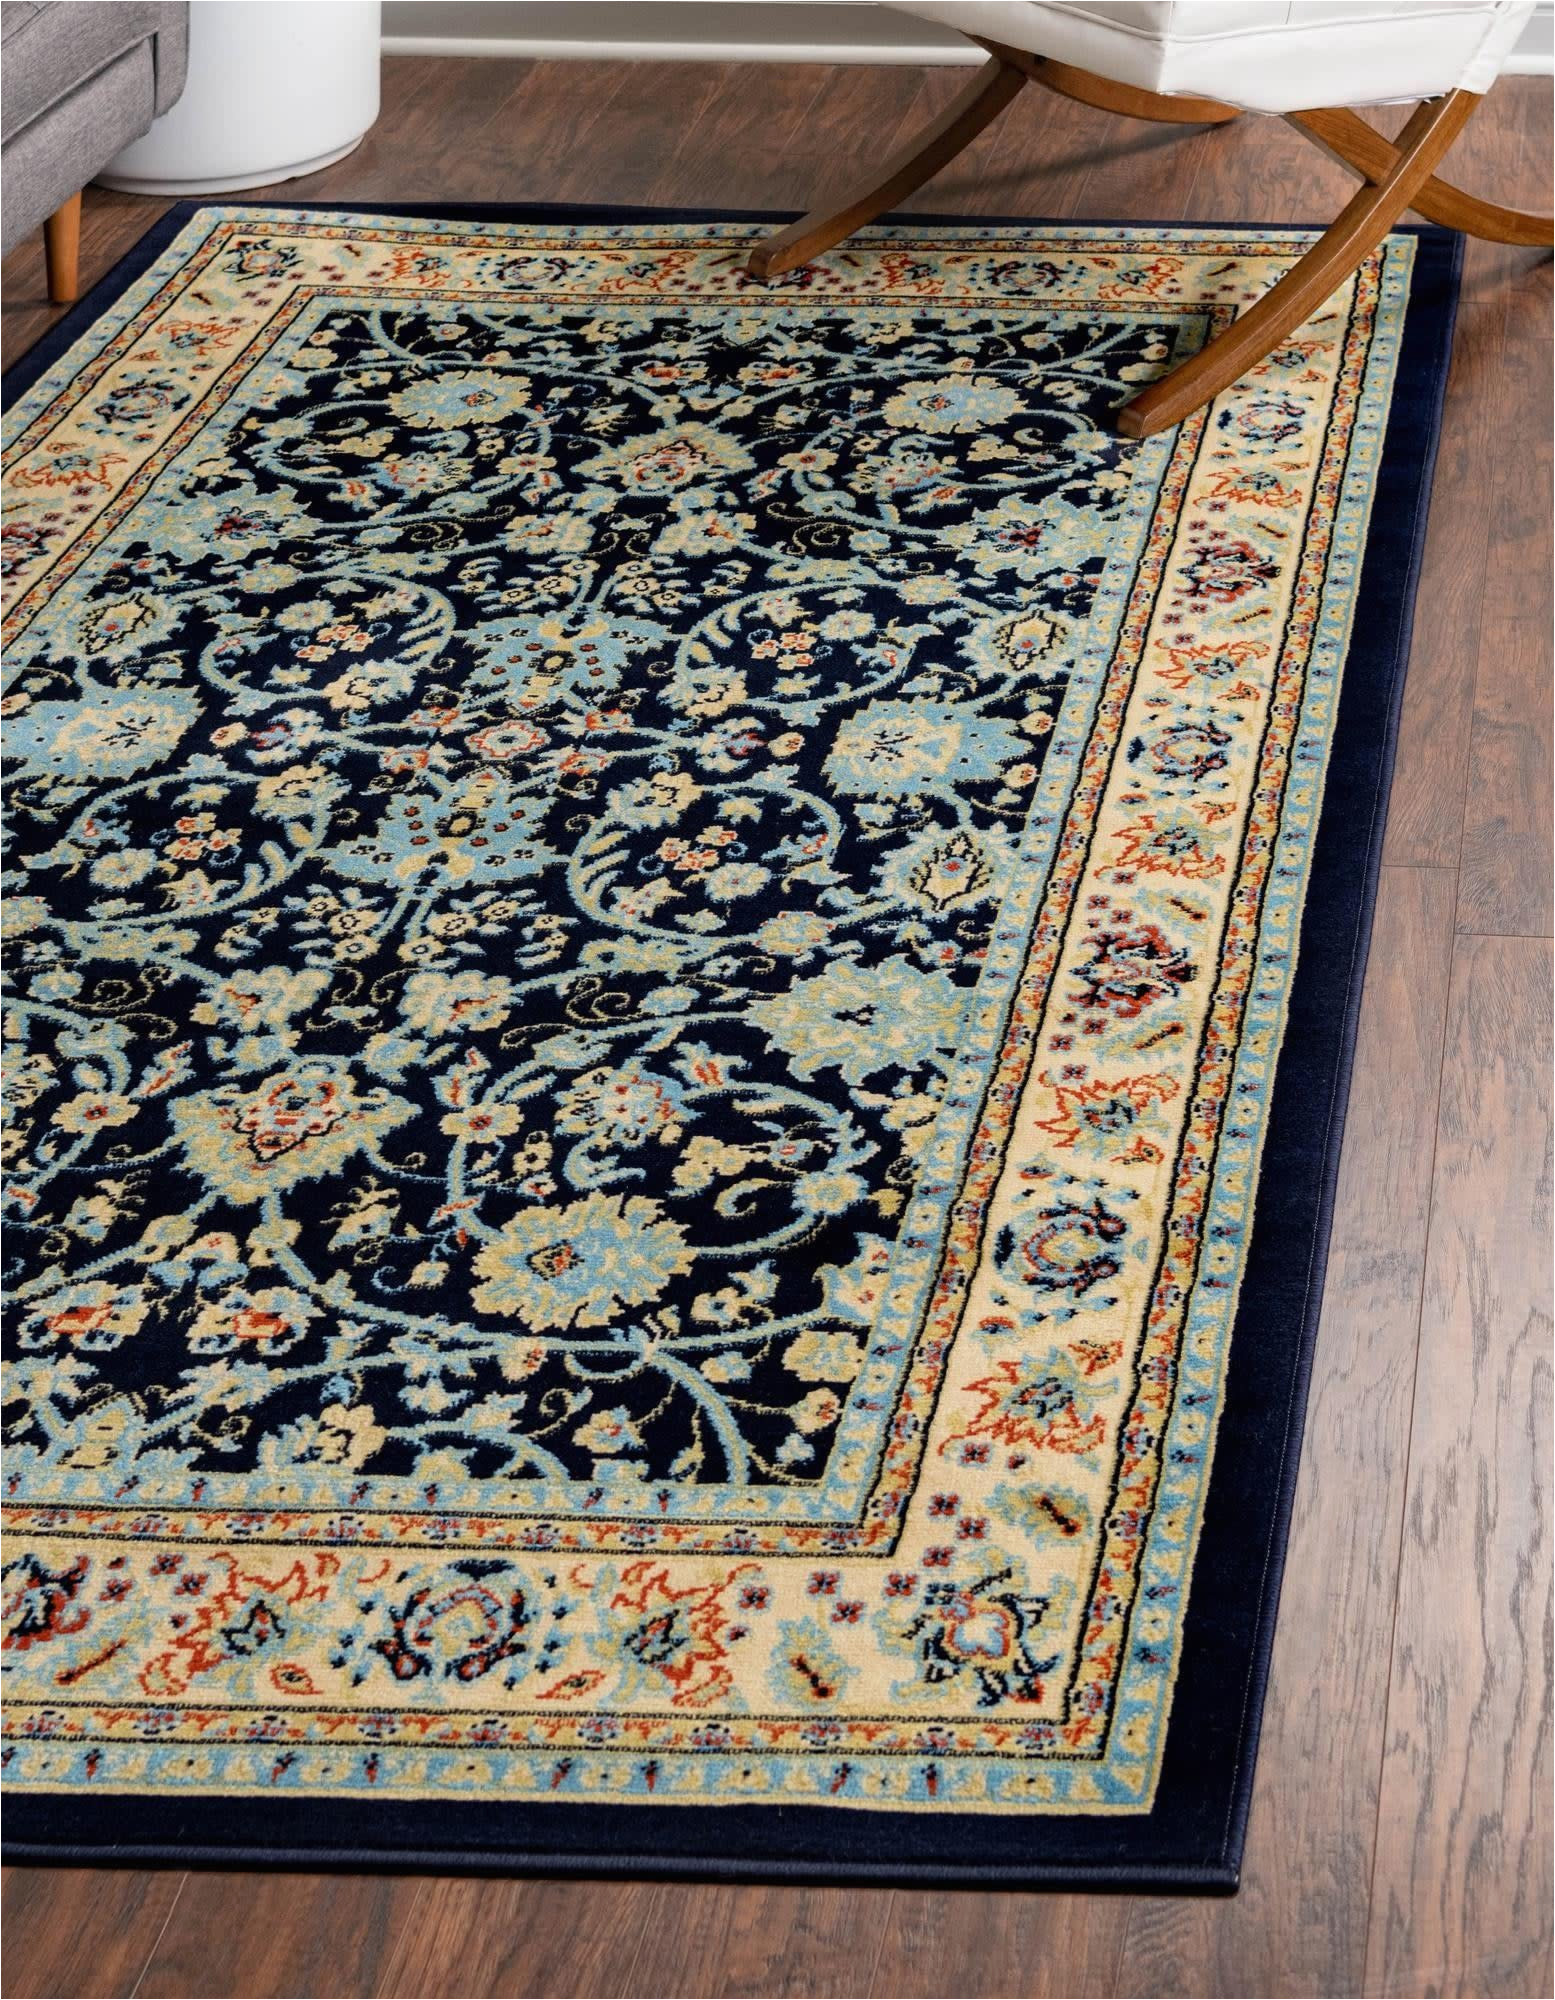 Unique Loom Washington Sialk Hill area Rug Unique Loom Sialk Hill Collection Traditional Persian Inspired Floral area Rug, 5 Ft X 8 Ft, Navy Blue/ivory